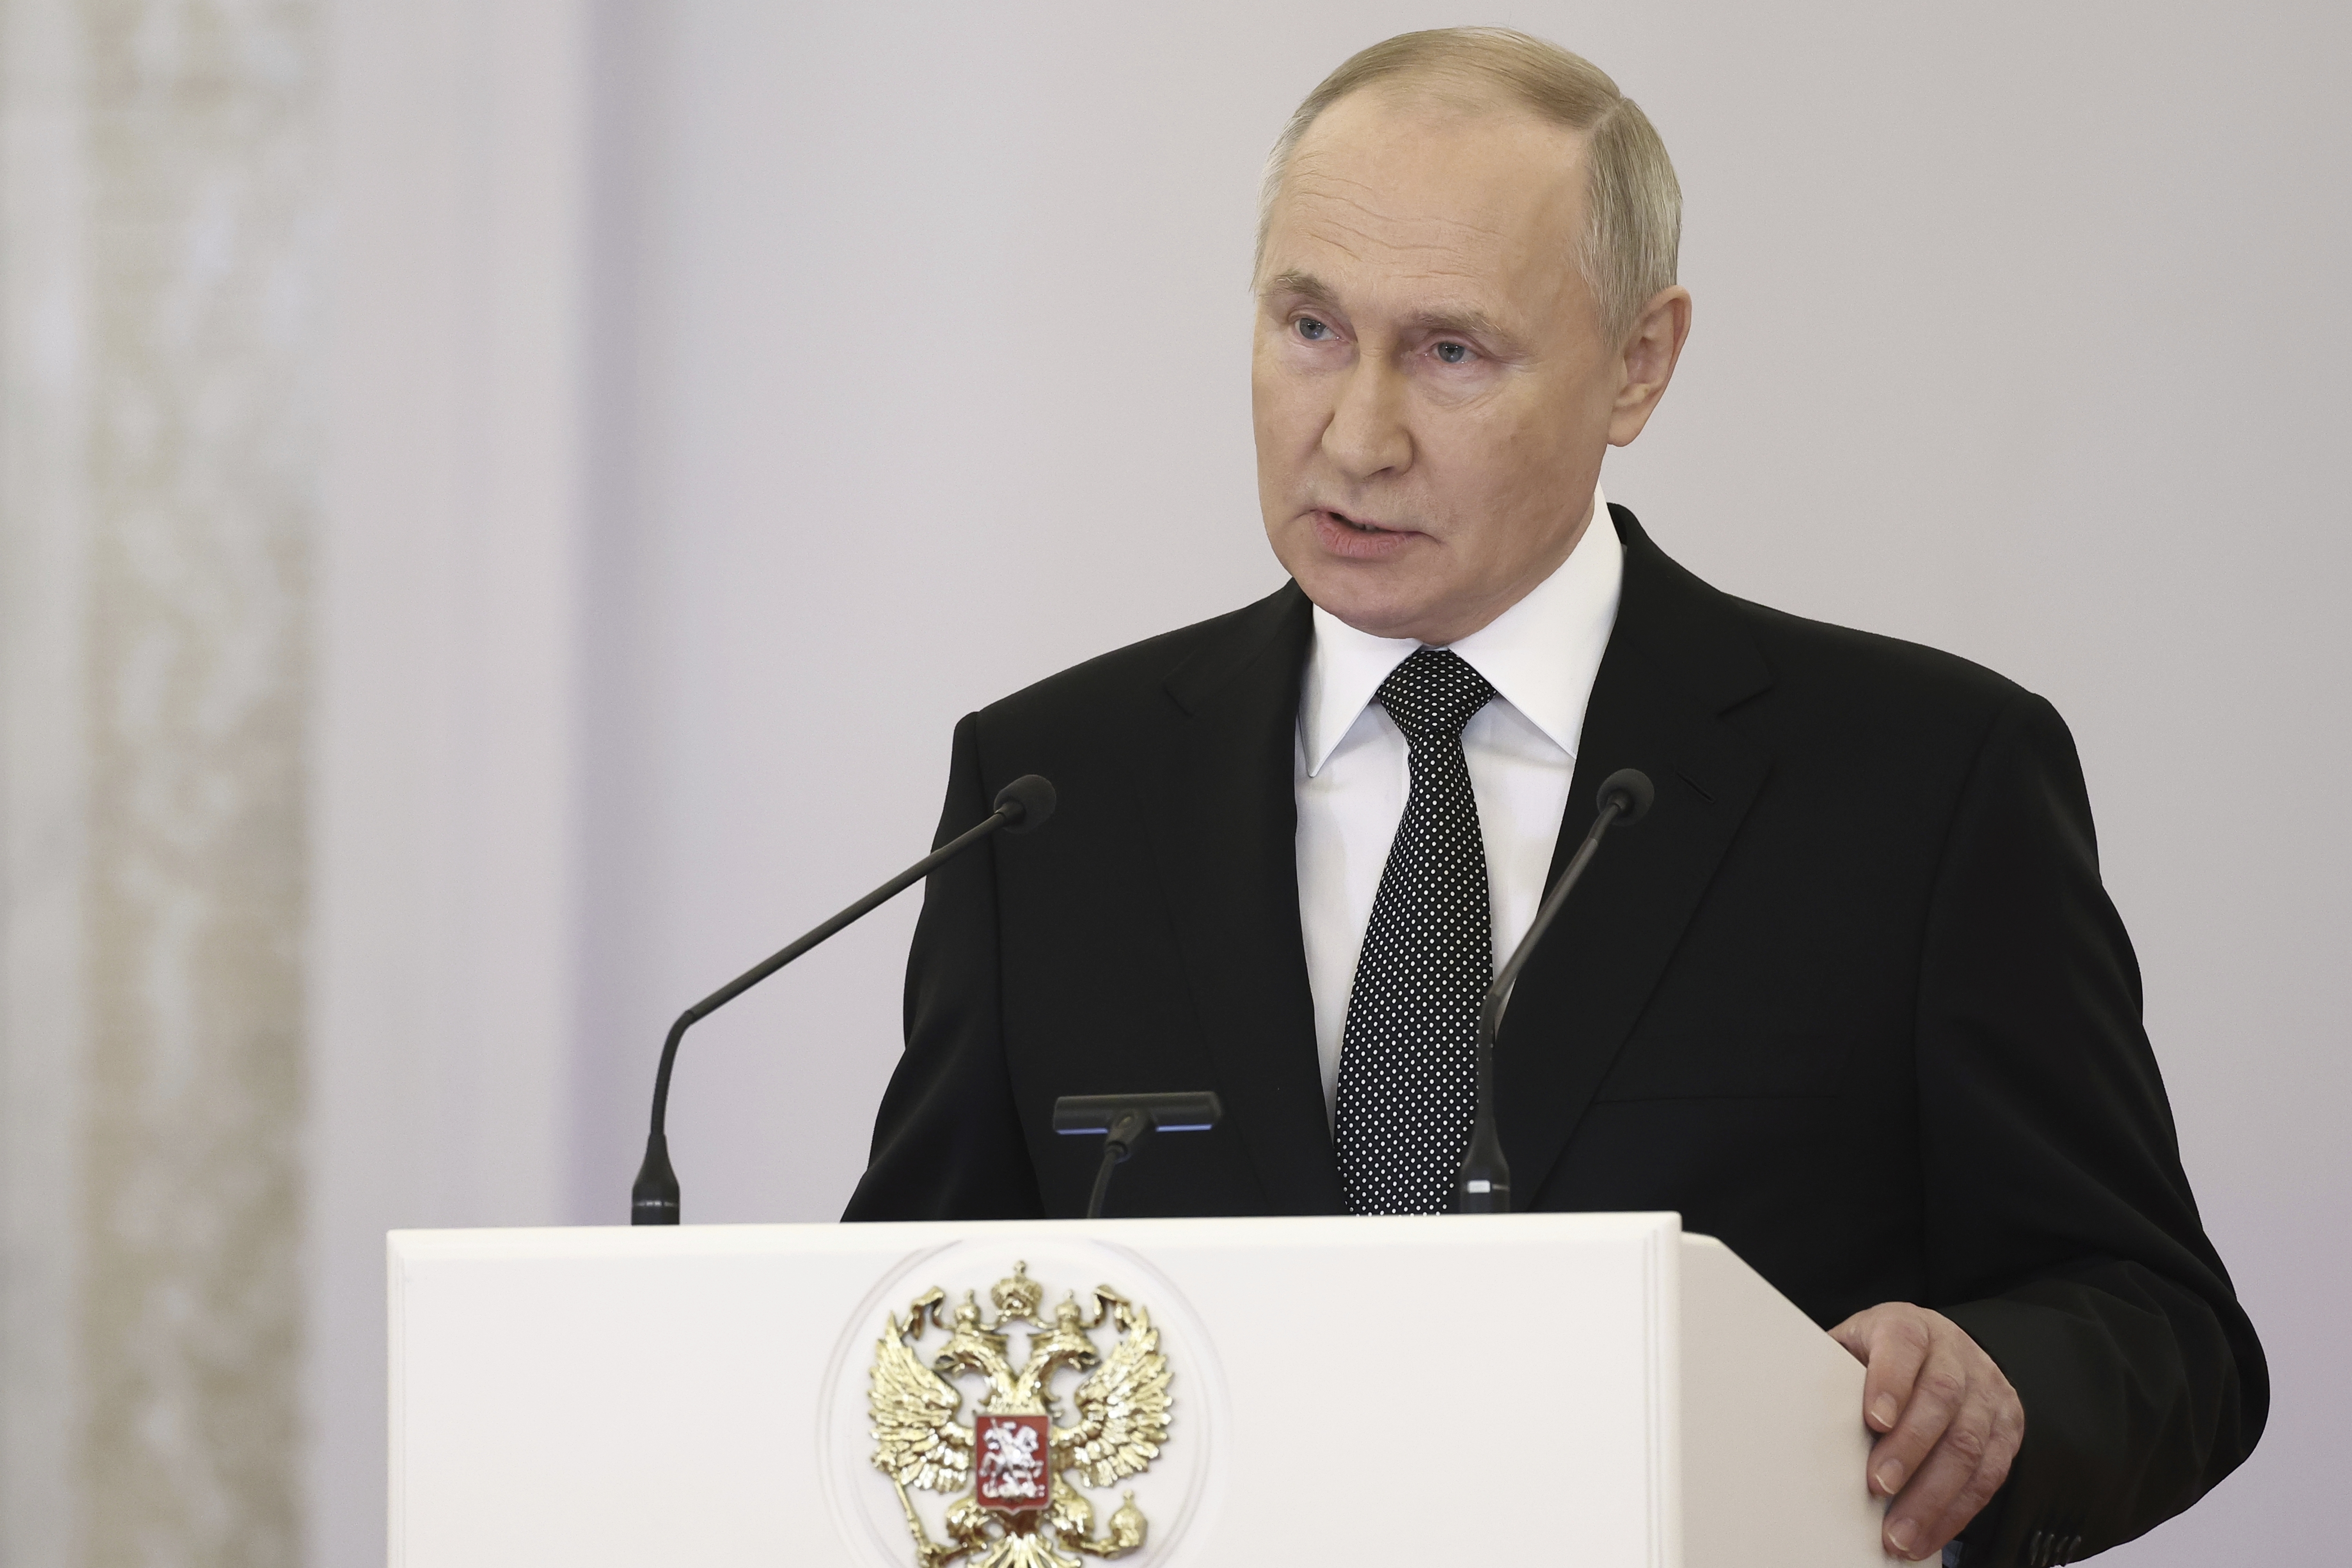 Putin to Seek Another Presidential Term in Russia, Extending Rule of Over Two Decades